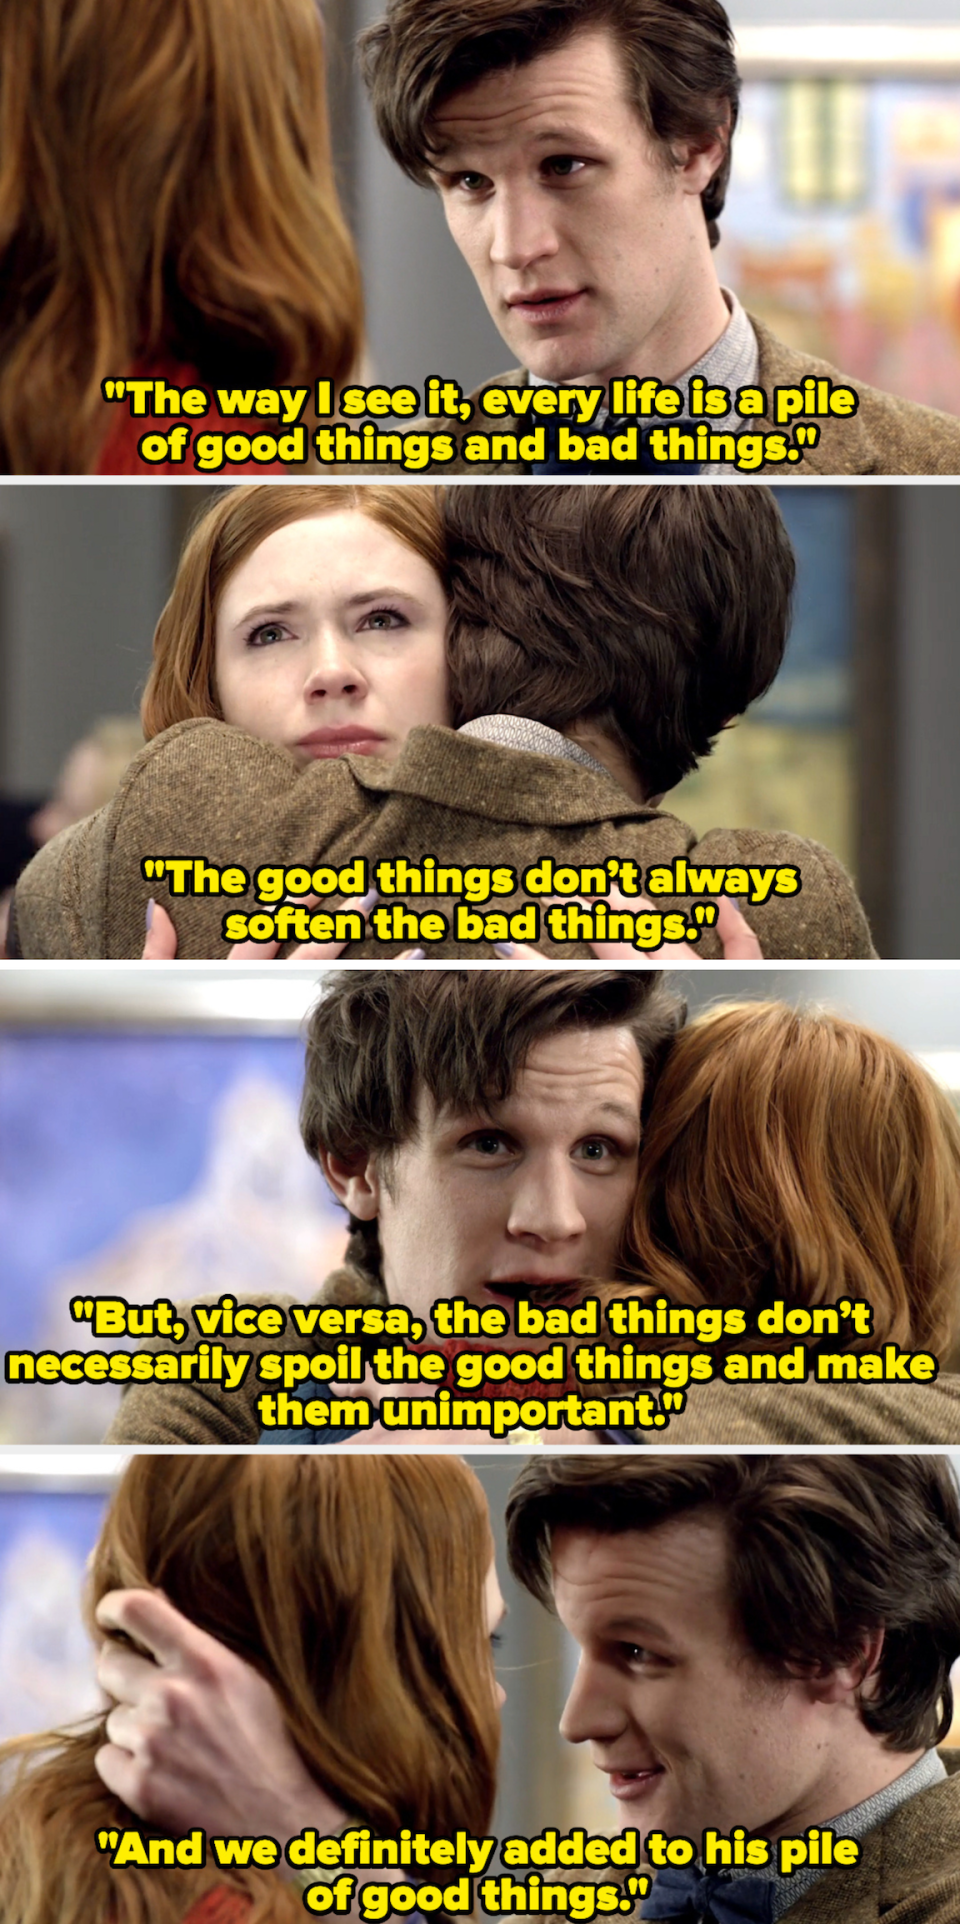 "And we definitely added to his pile of good things."